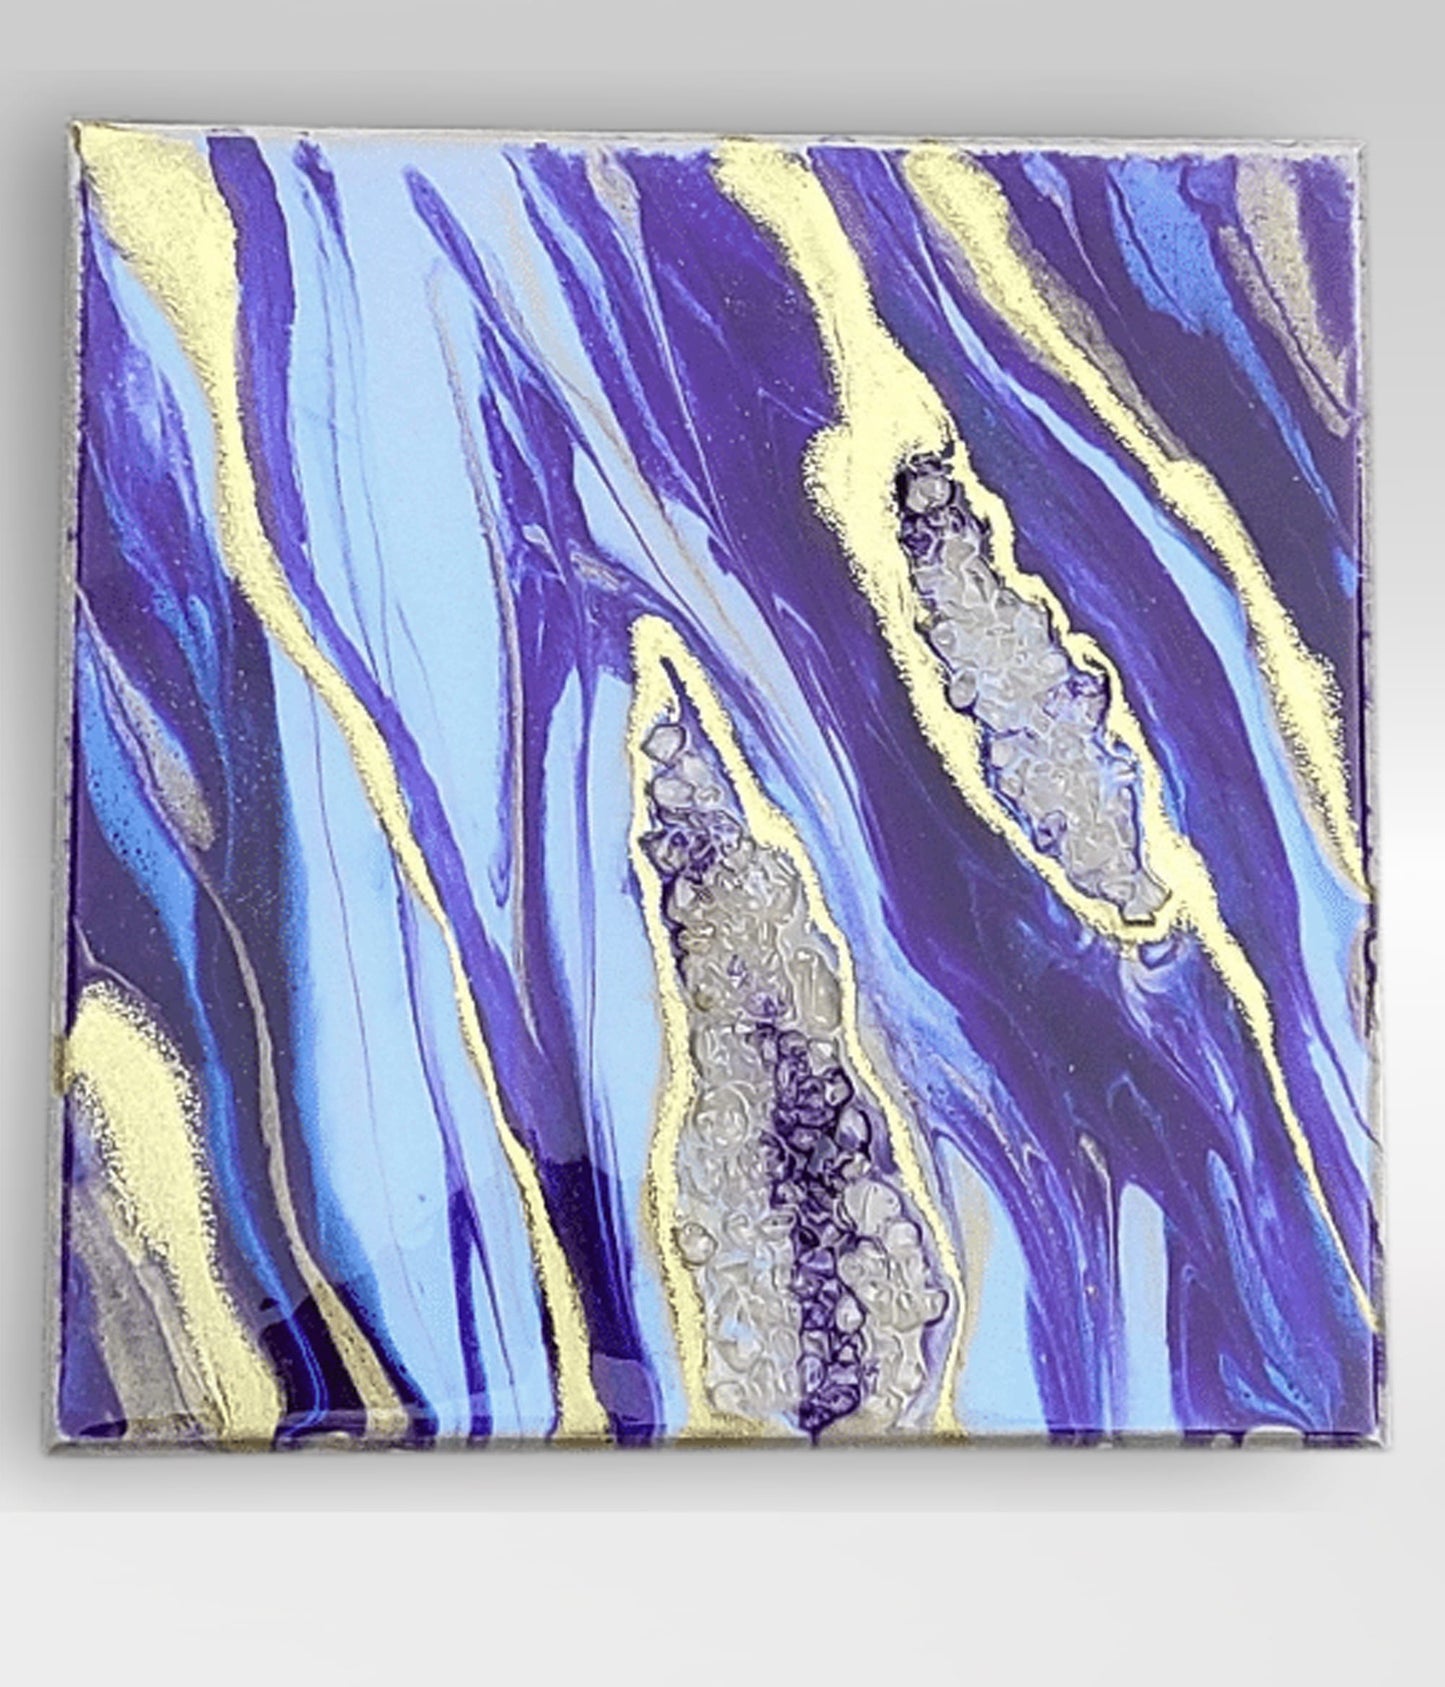 Isolation – 11 x 11 Resin Painting On MDF